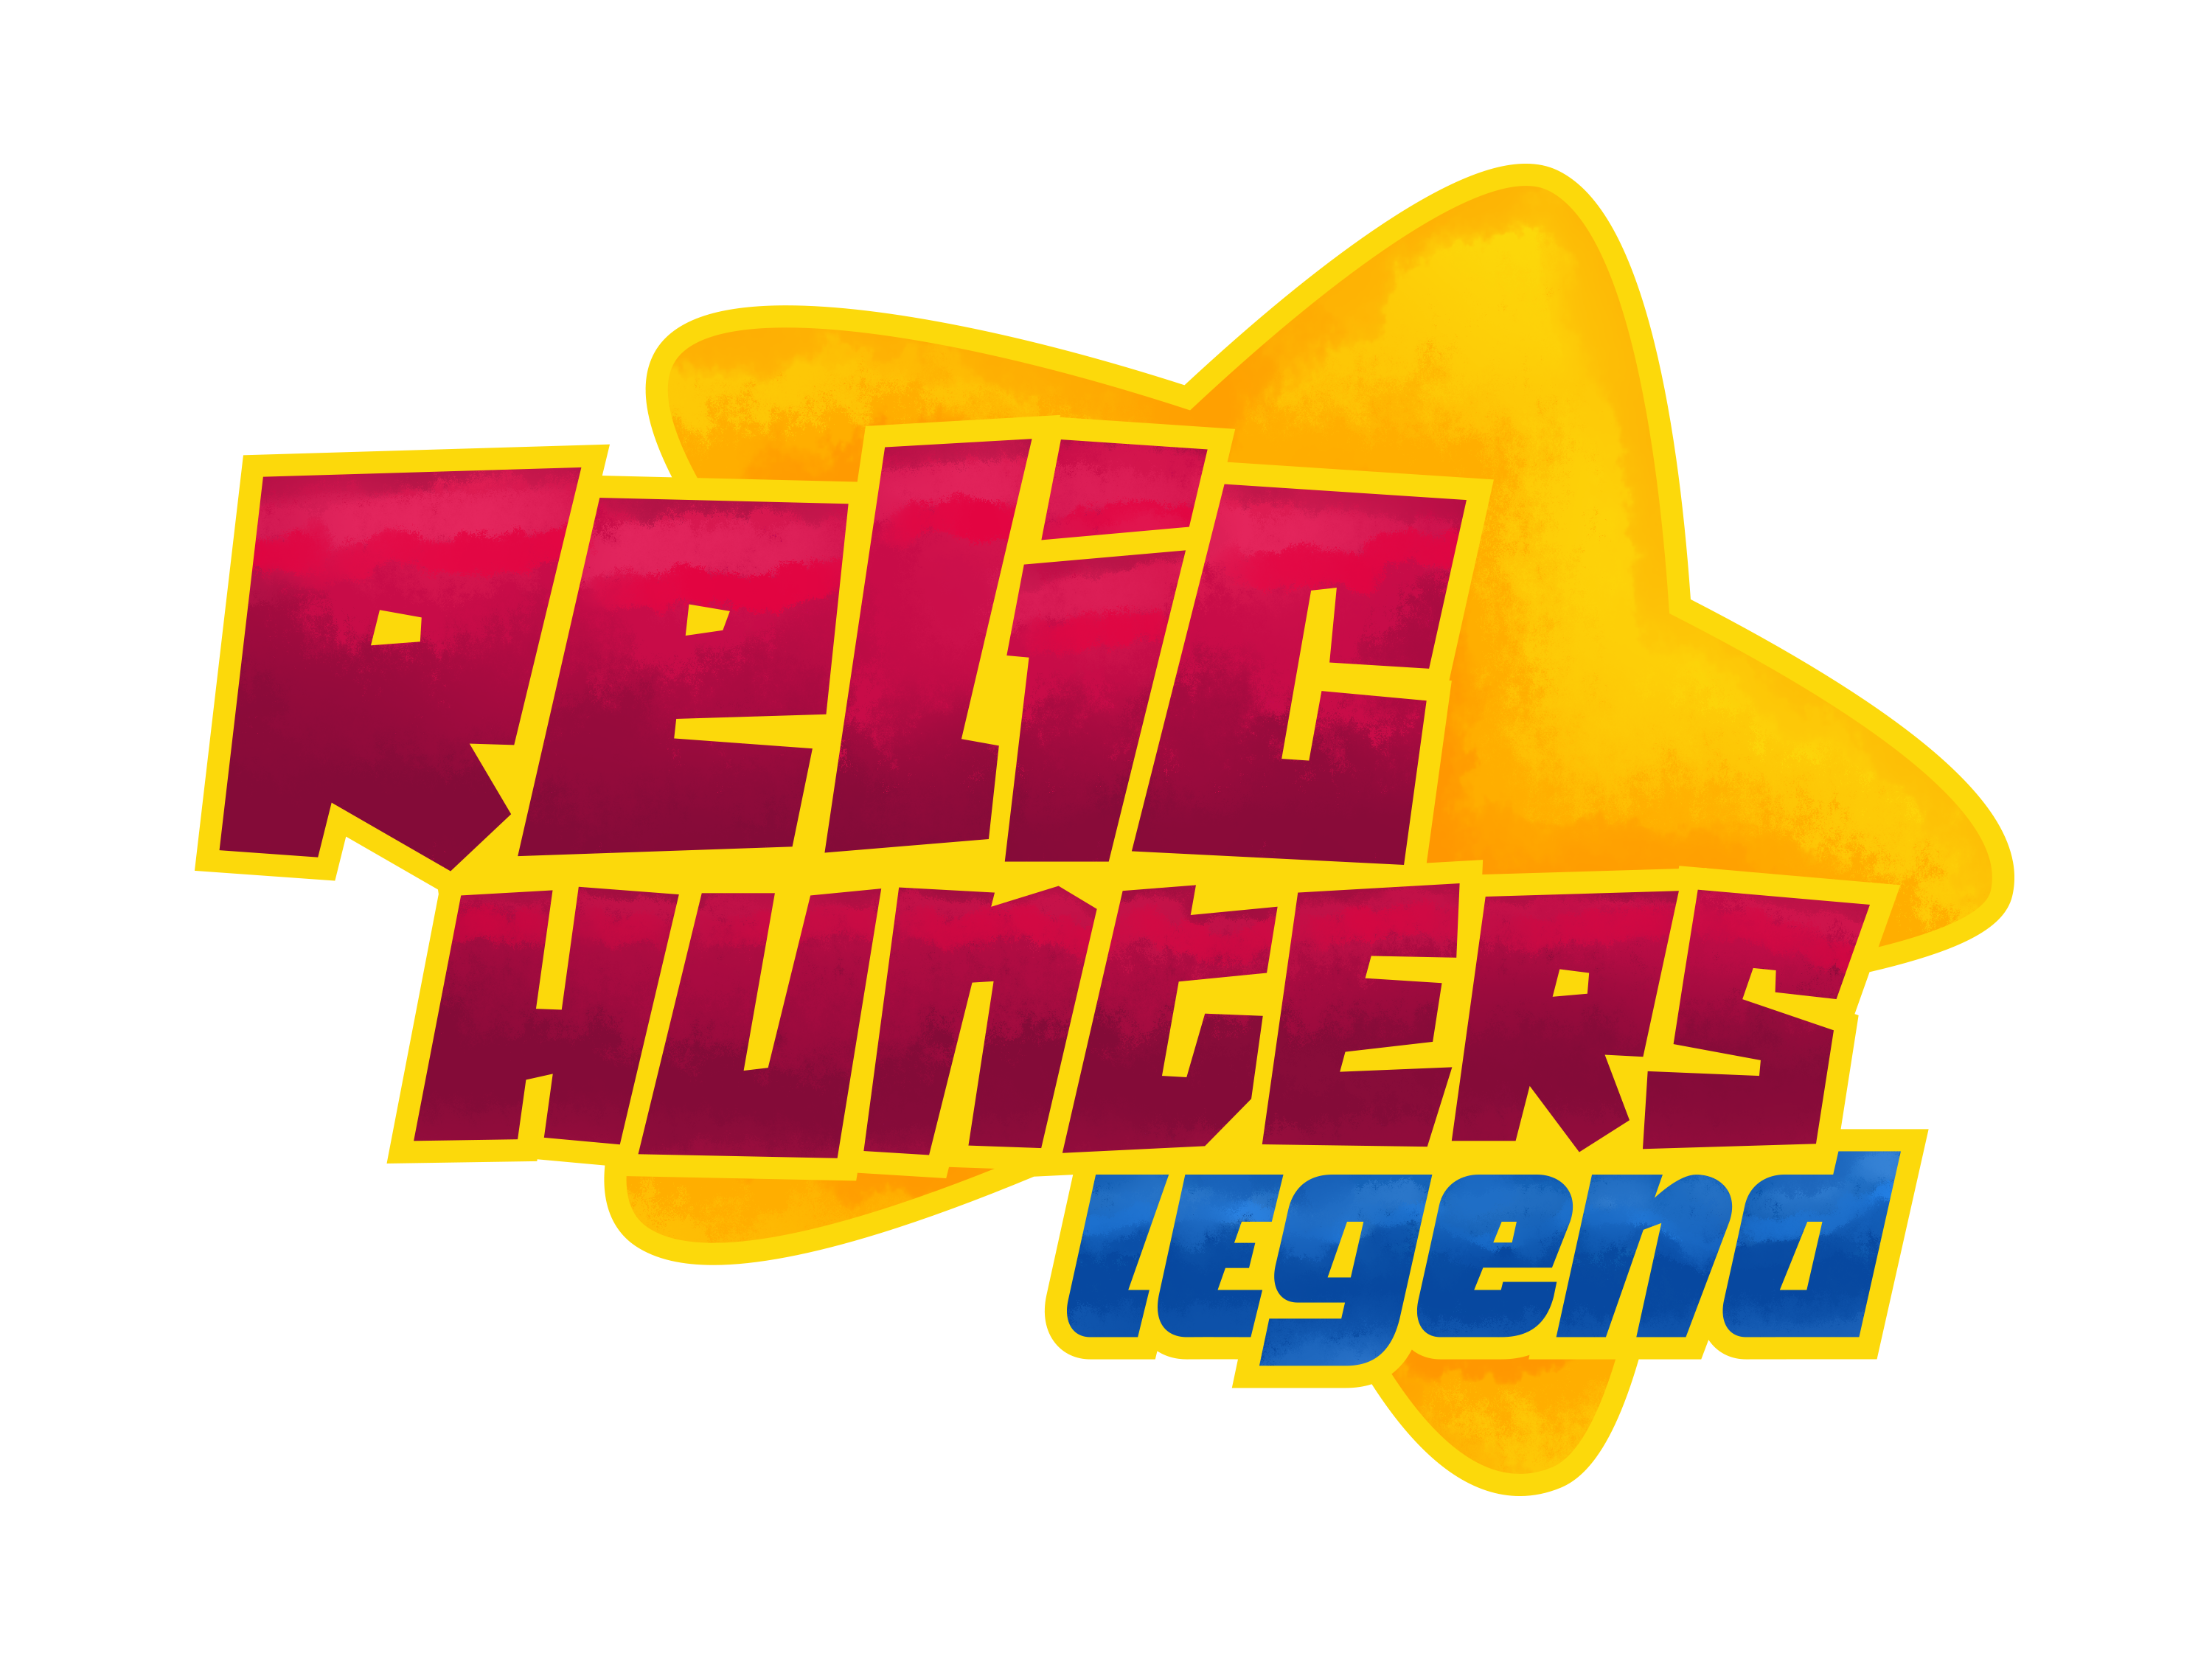 relic hunters legend game